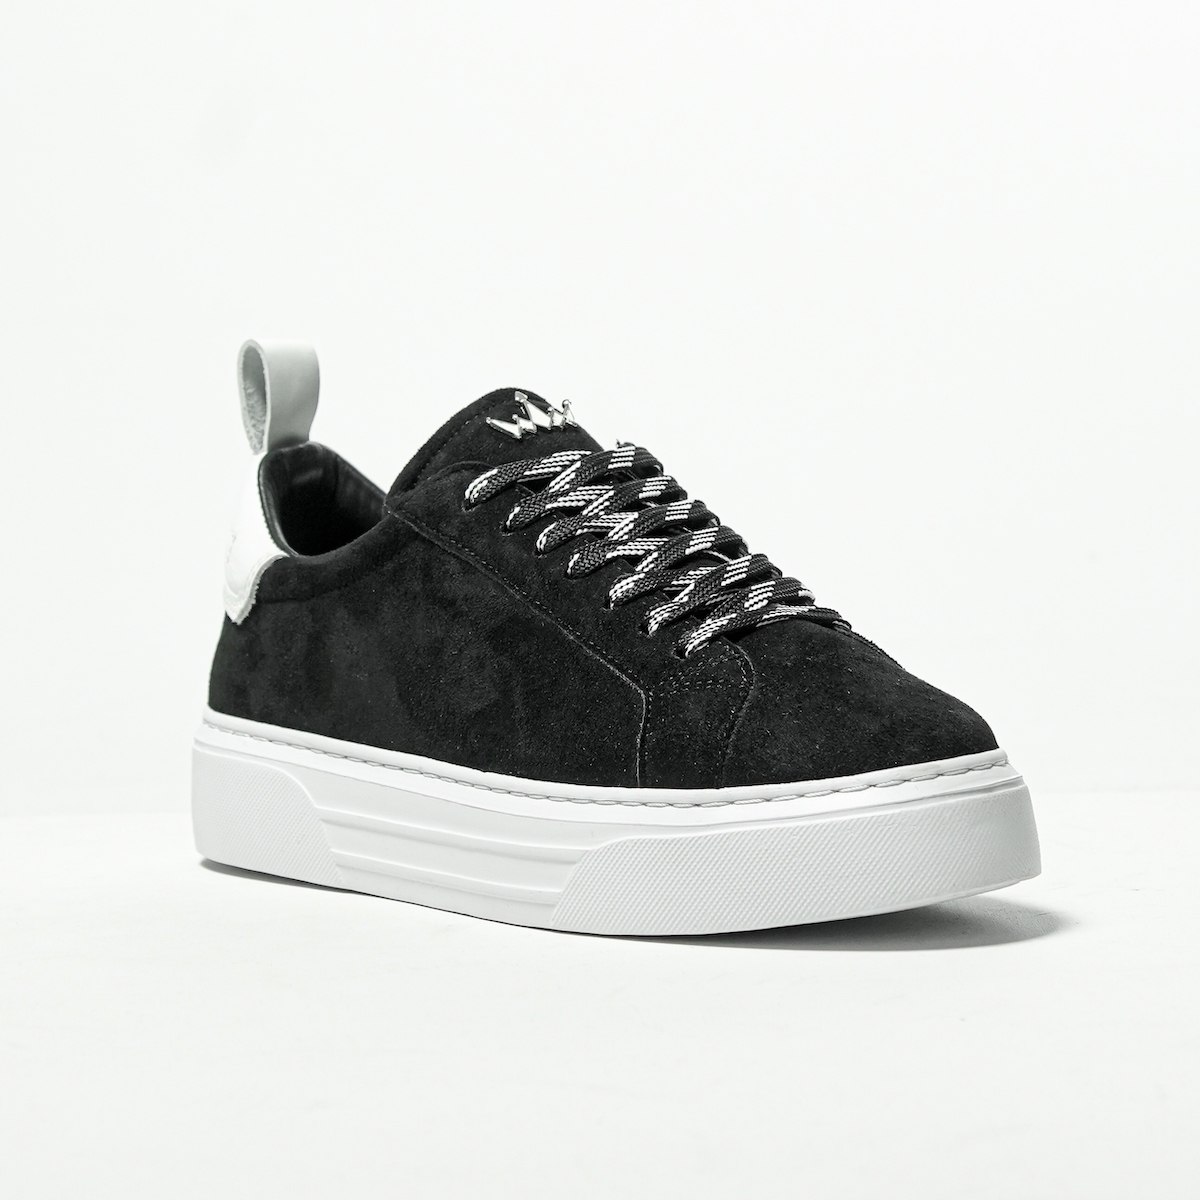 Bobe Suede Belted New Sneakers Black White | Martin Valen